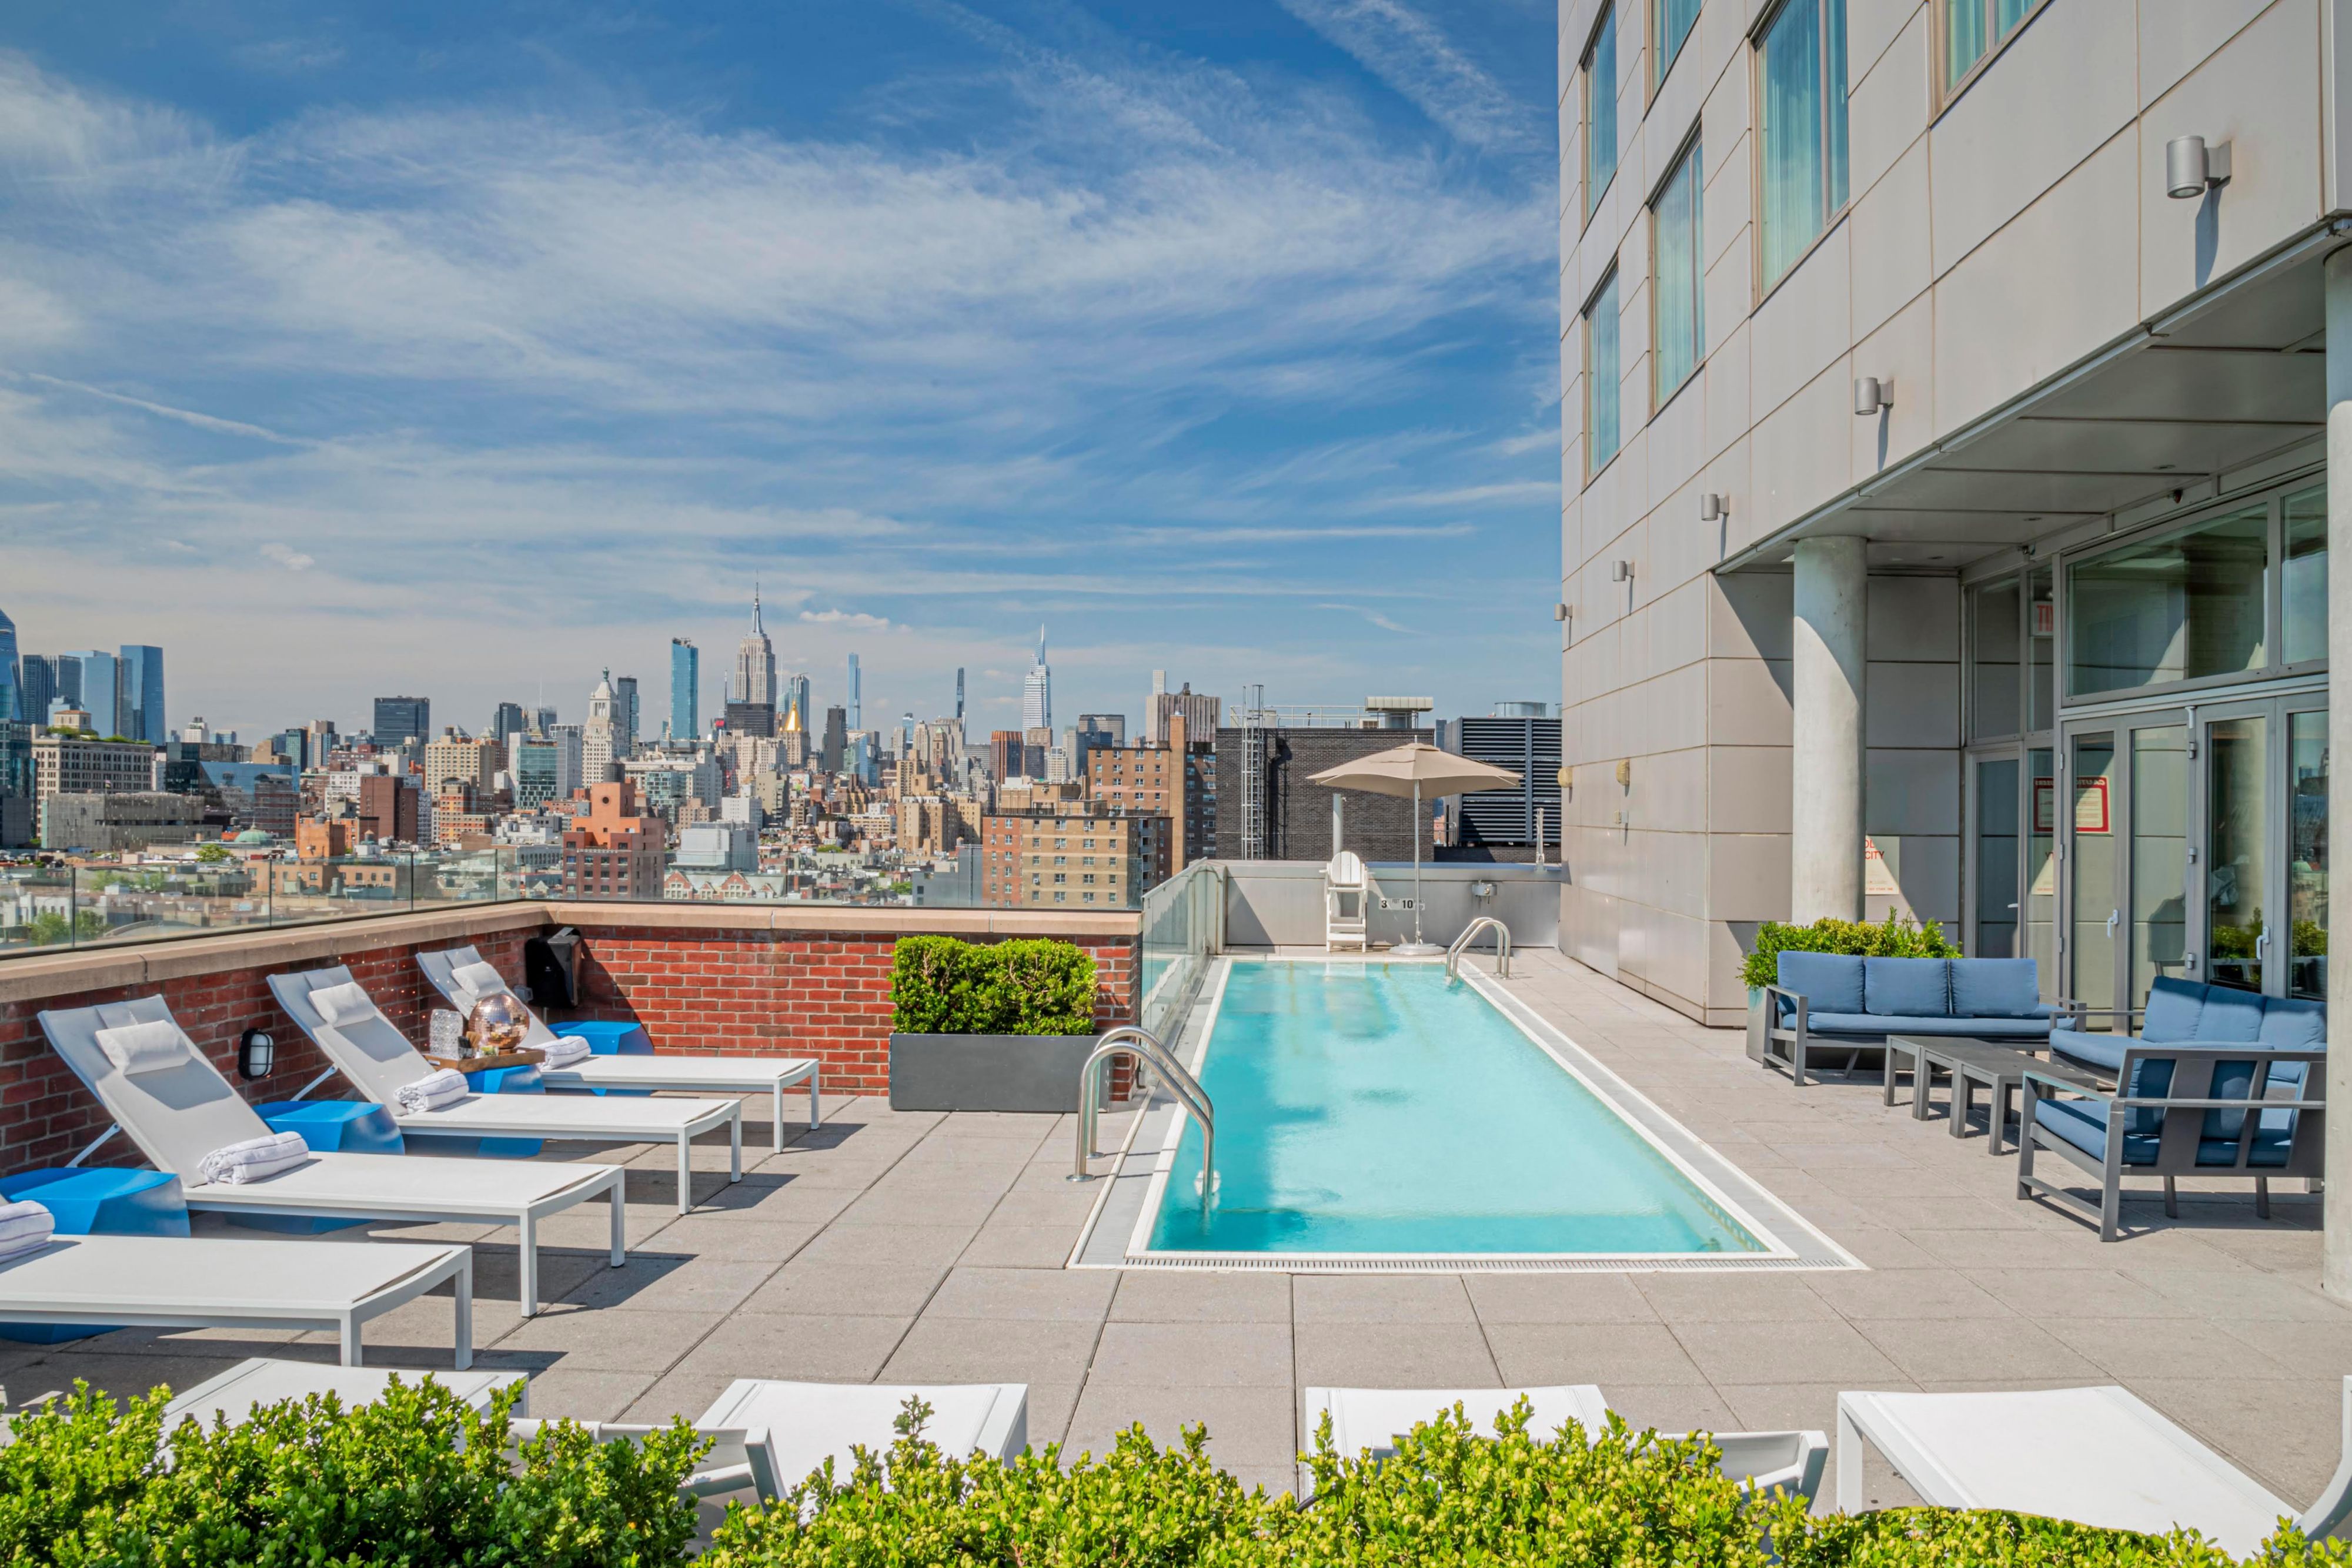 Take a dip, take a sip and take in the striking skyline of one of the world’s greatest cities. There’s nowhere better to beat the heat than our seasonal rooftop pool as you enjoy a cocktail from our signature rooftop bar, Mr. Purple, and let your stress melt away. 